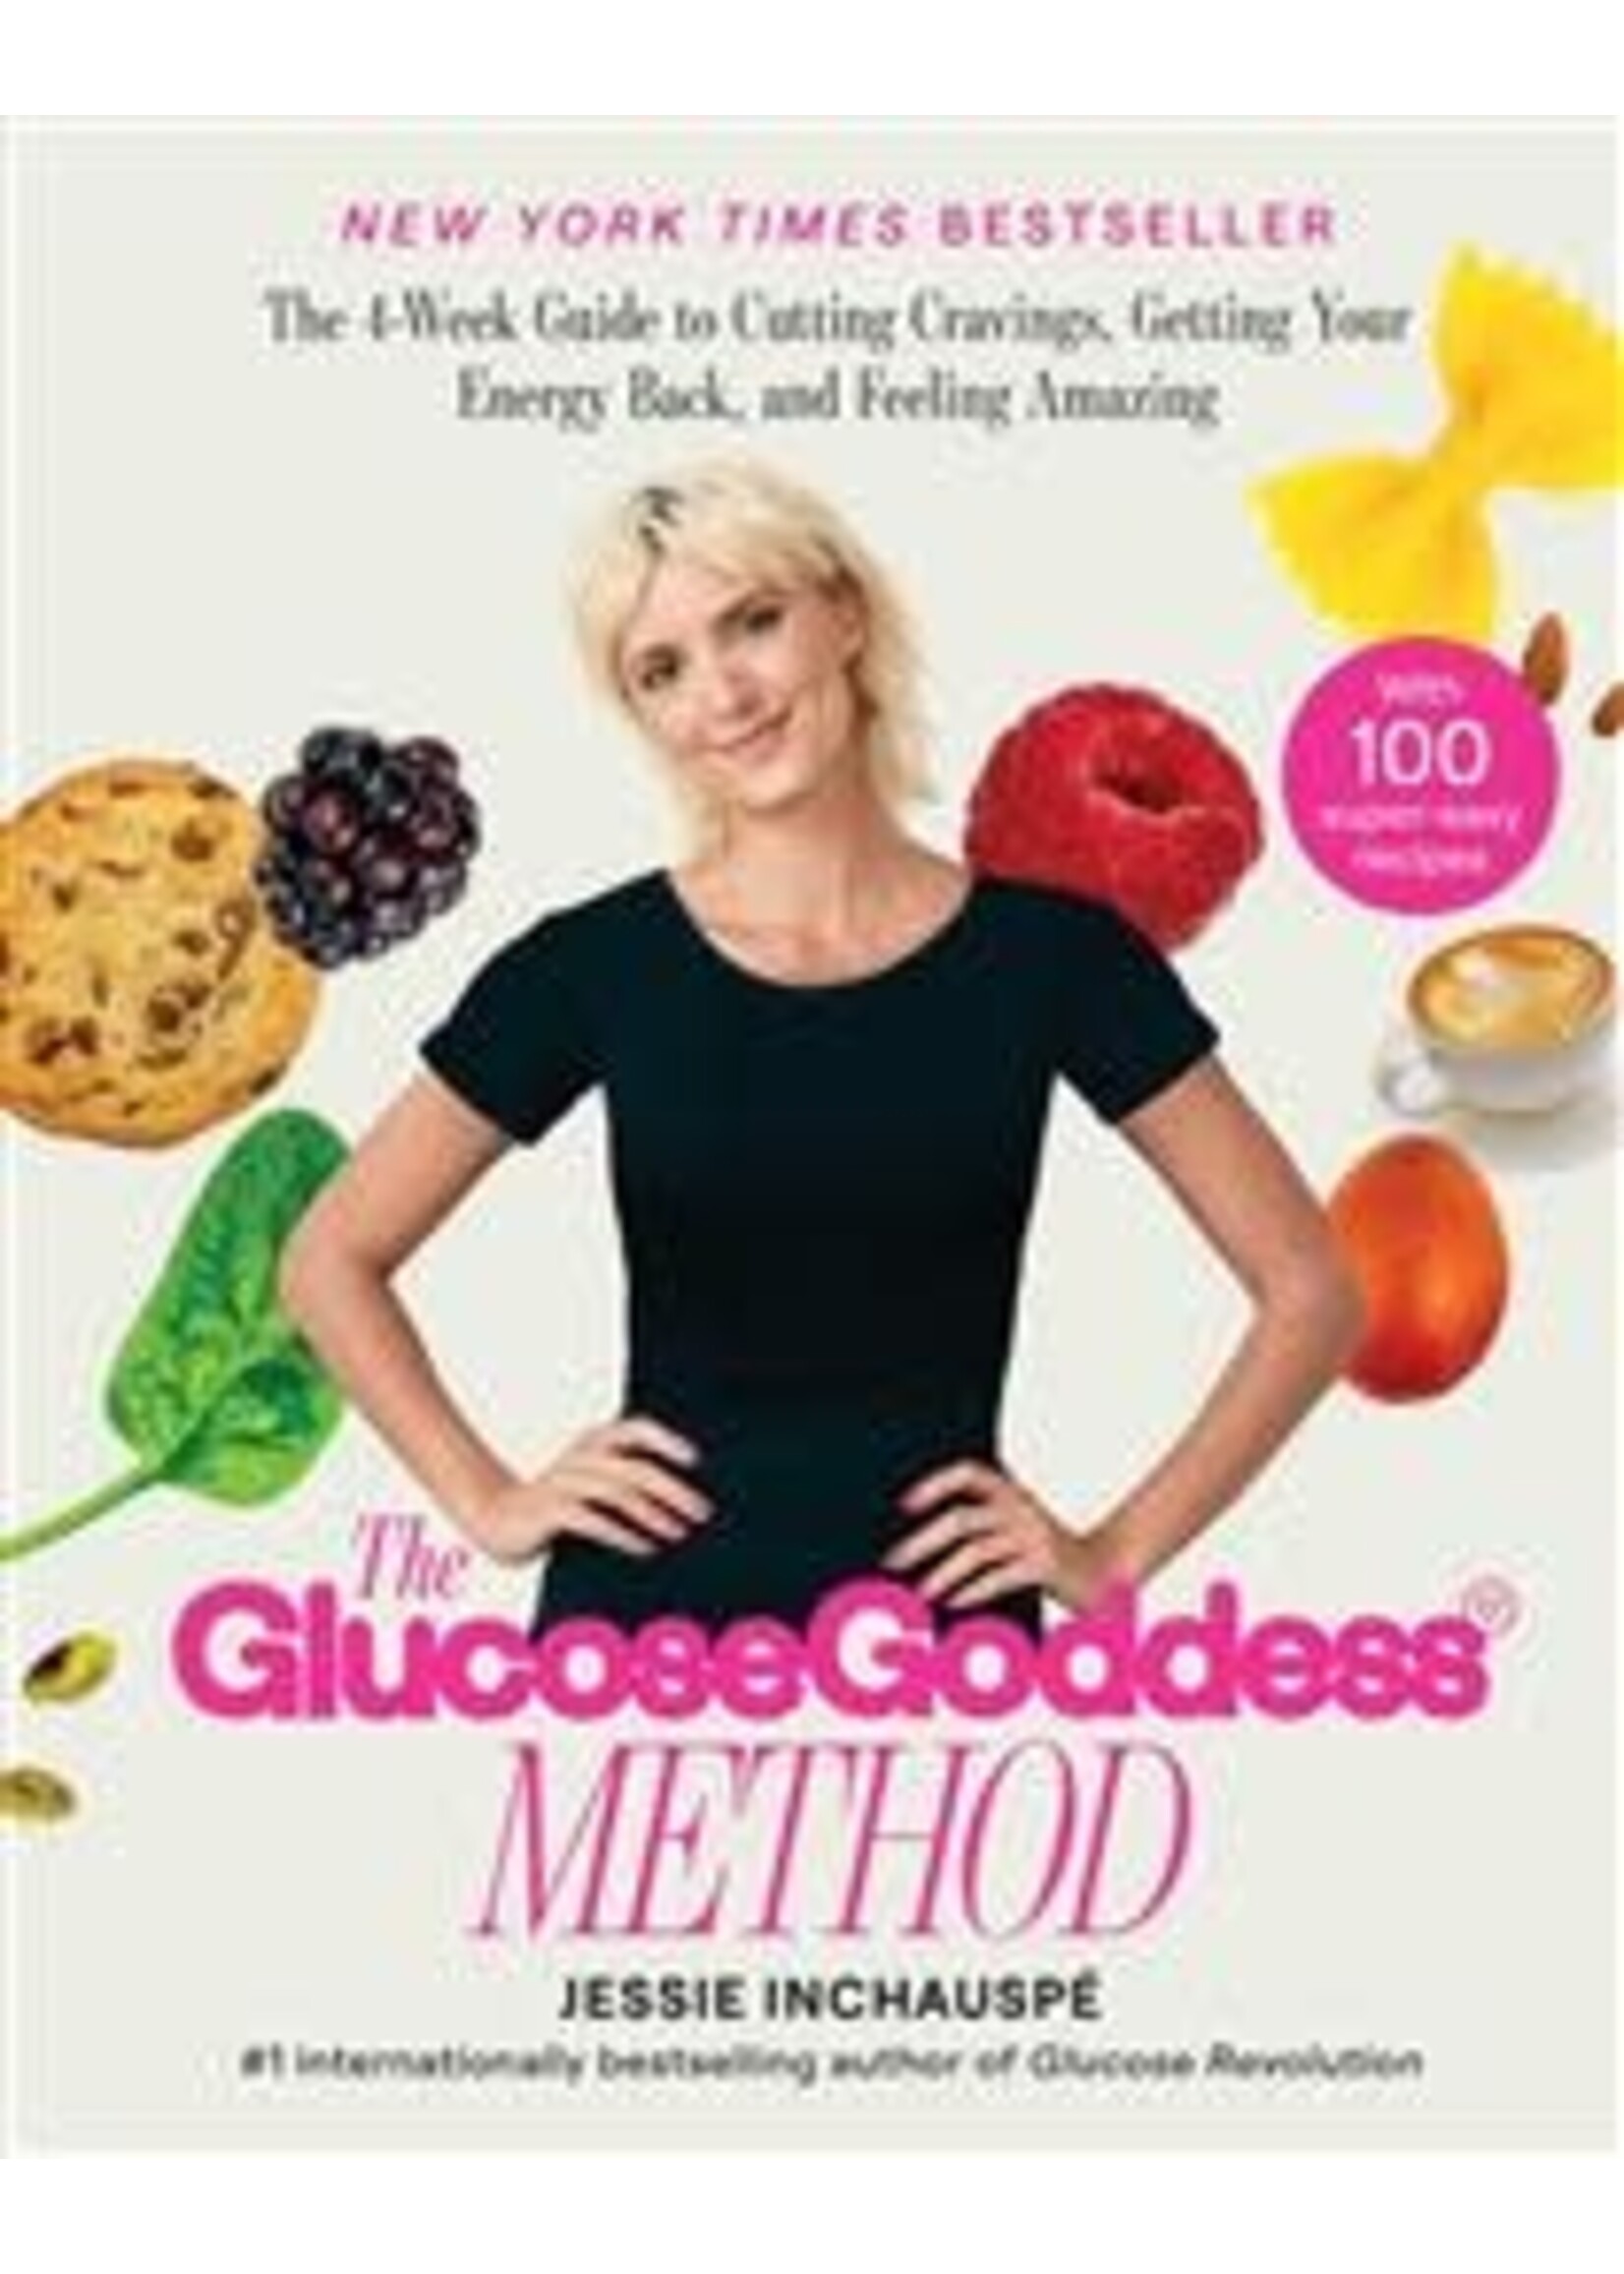 The Glucose Goddess Method: The 4-Week Guide to Cutting Cravings, Getting Your Energy Back, and Feeling Amazing by Jessie Inchauspe